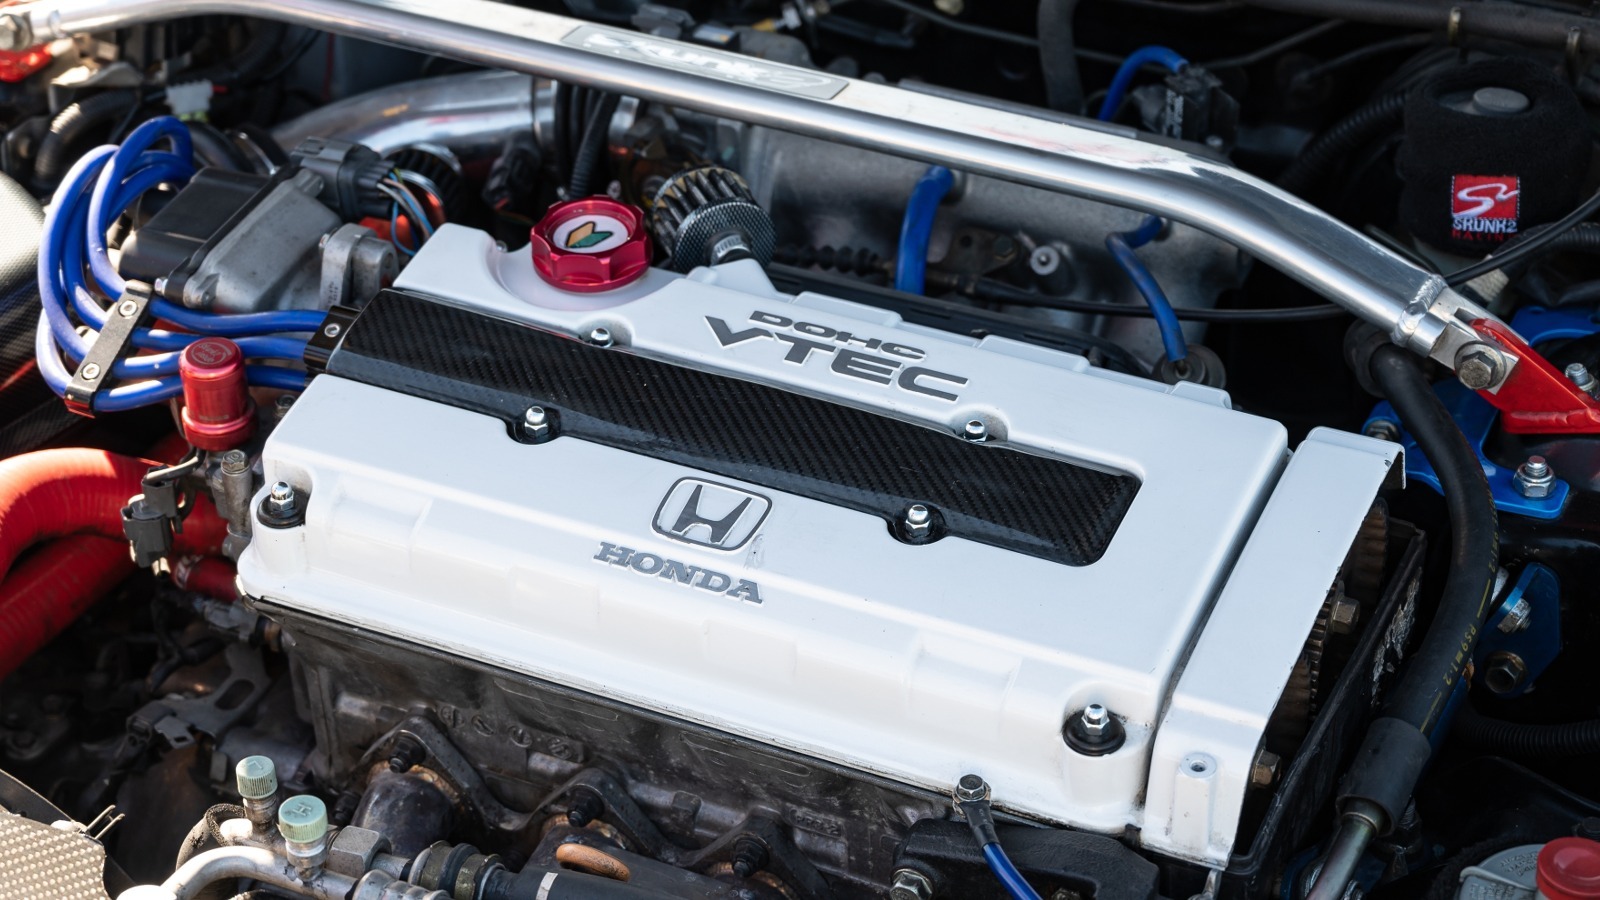 SOHC Vs DOHC Engines Explained: What's The Difference, And Which Is Better?